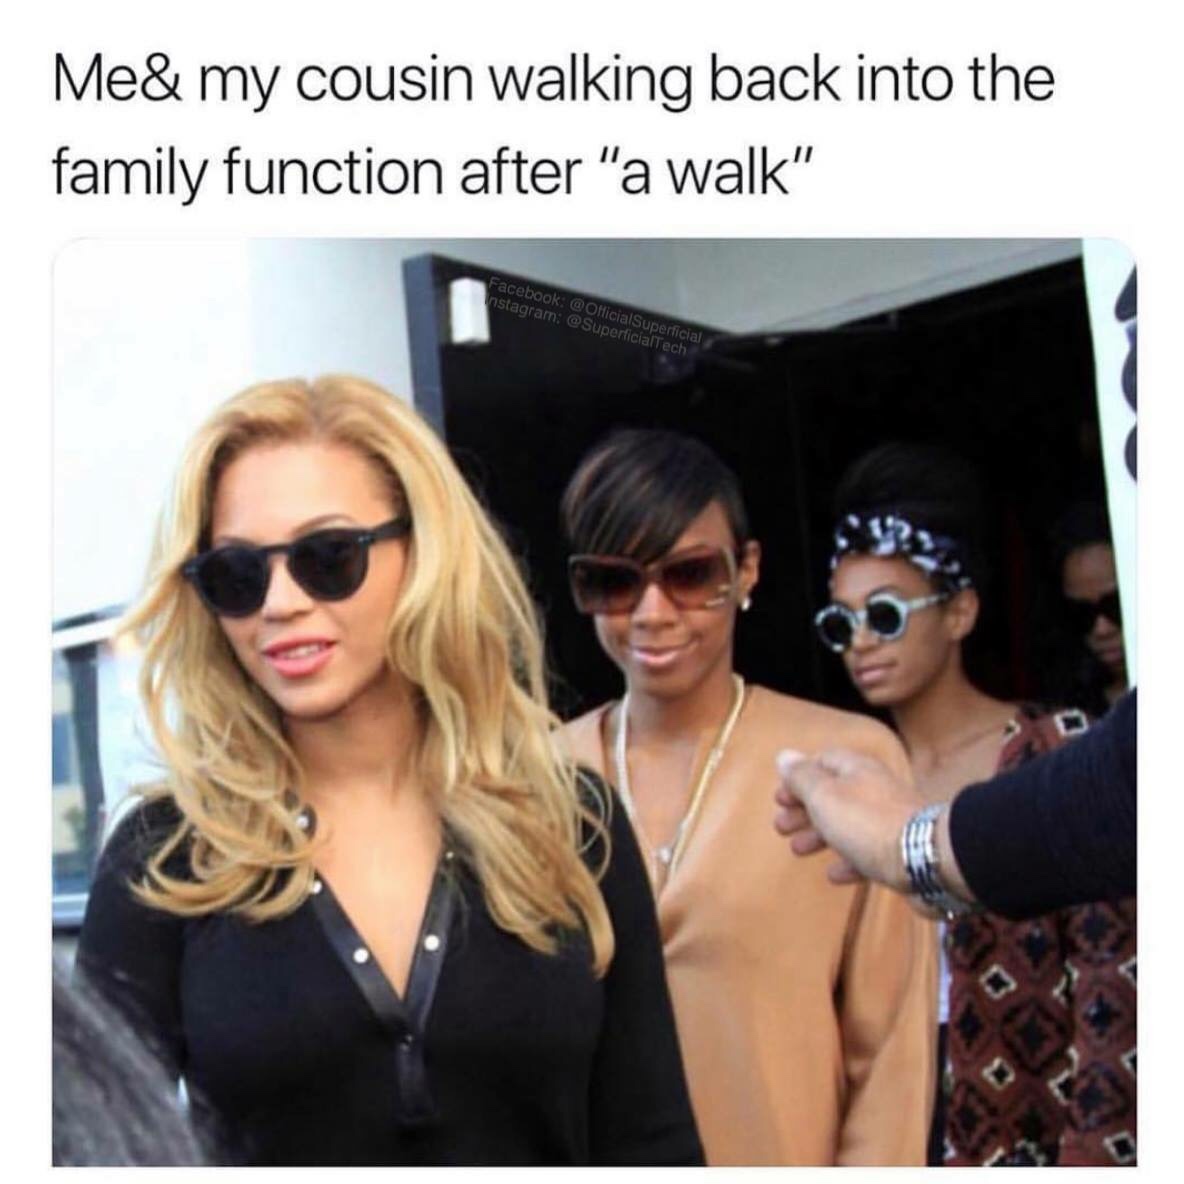 solange kelly rowland beyonce - Me& my cousin walking back into the family function after "a walk" Facebook nstagram